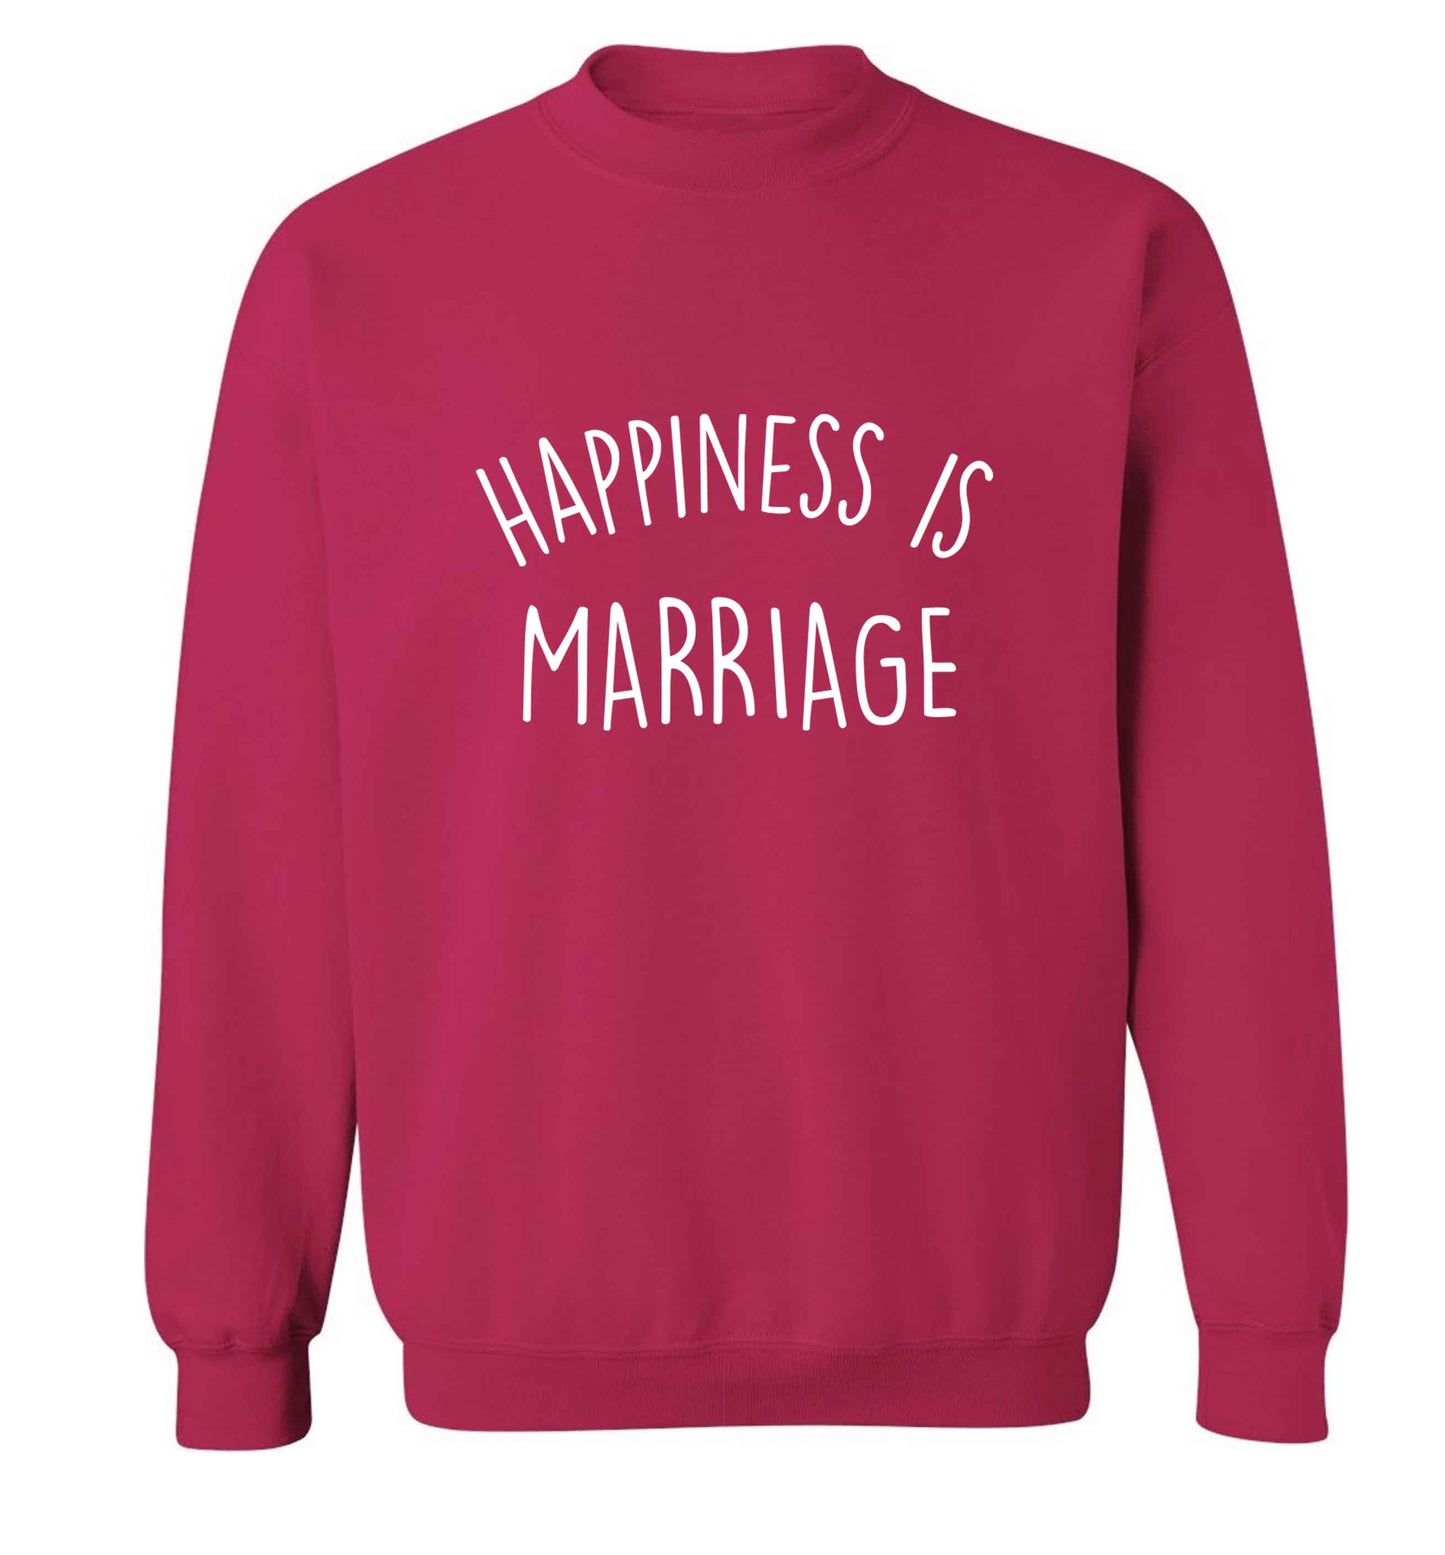 Happiness is marriage adult's unisex pink sweater 2XL